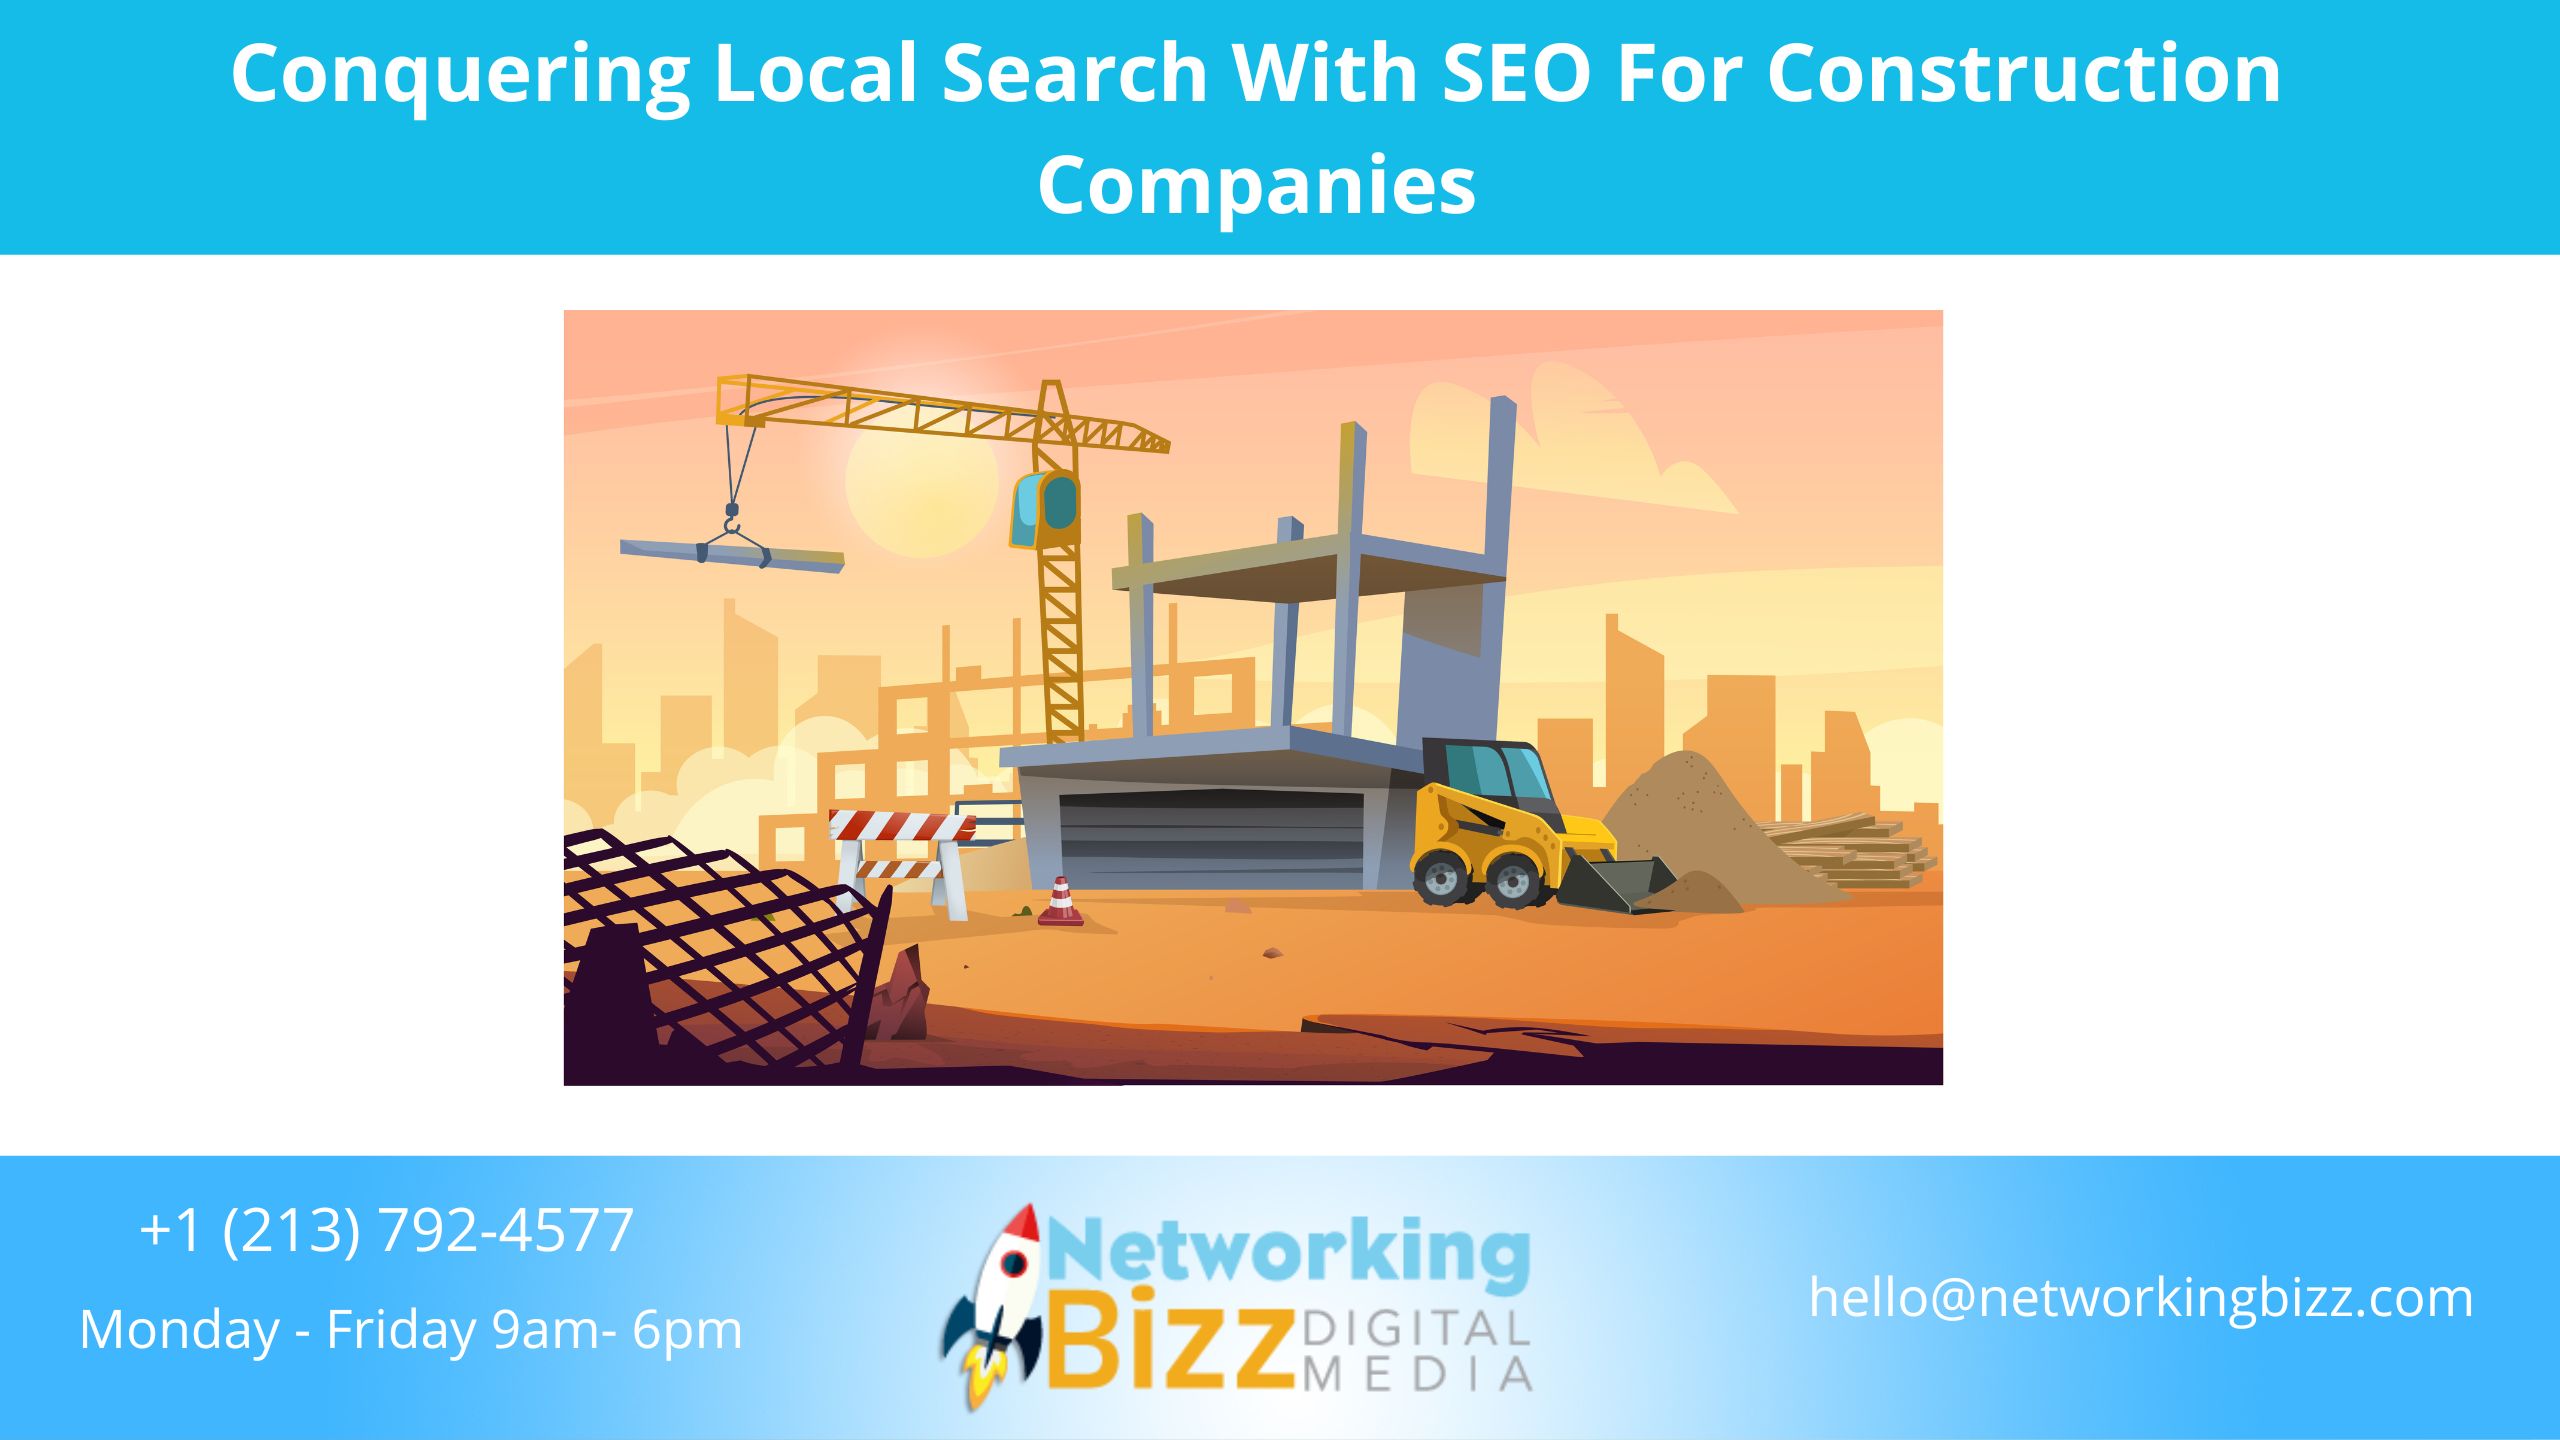 Conquering Local Search With SEO For Construction Companies